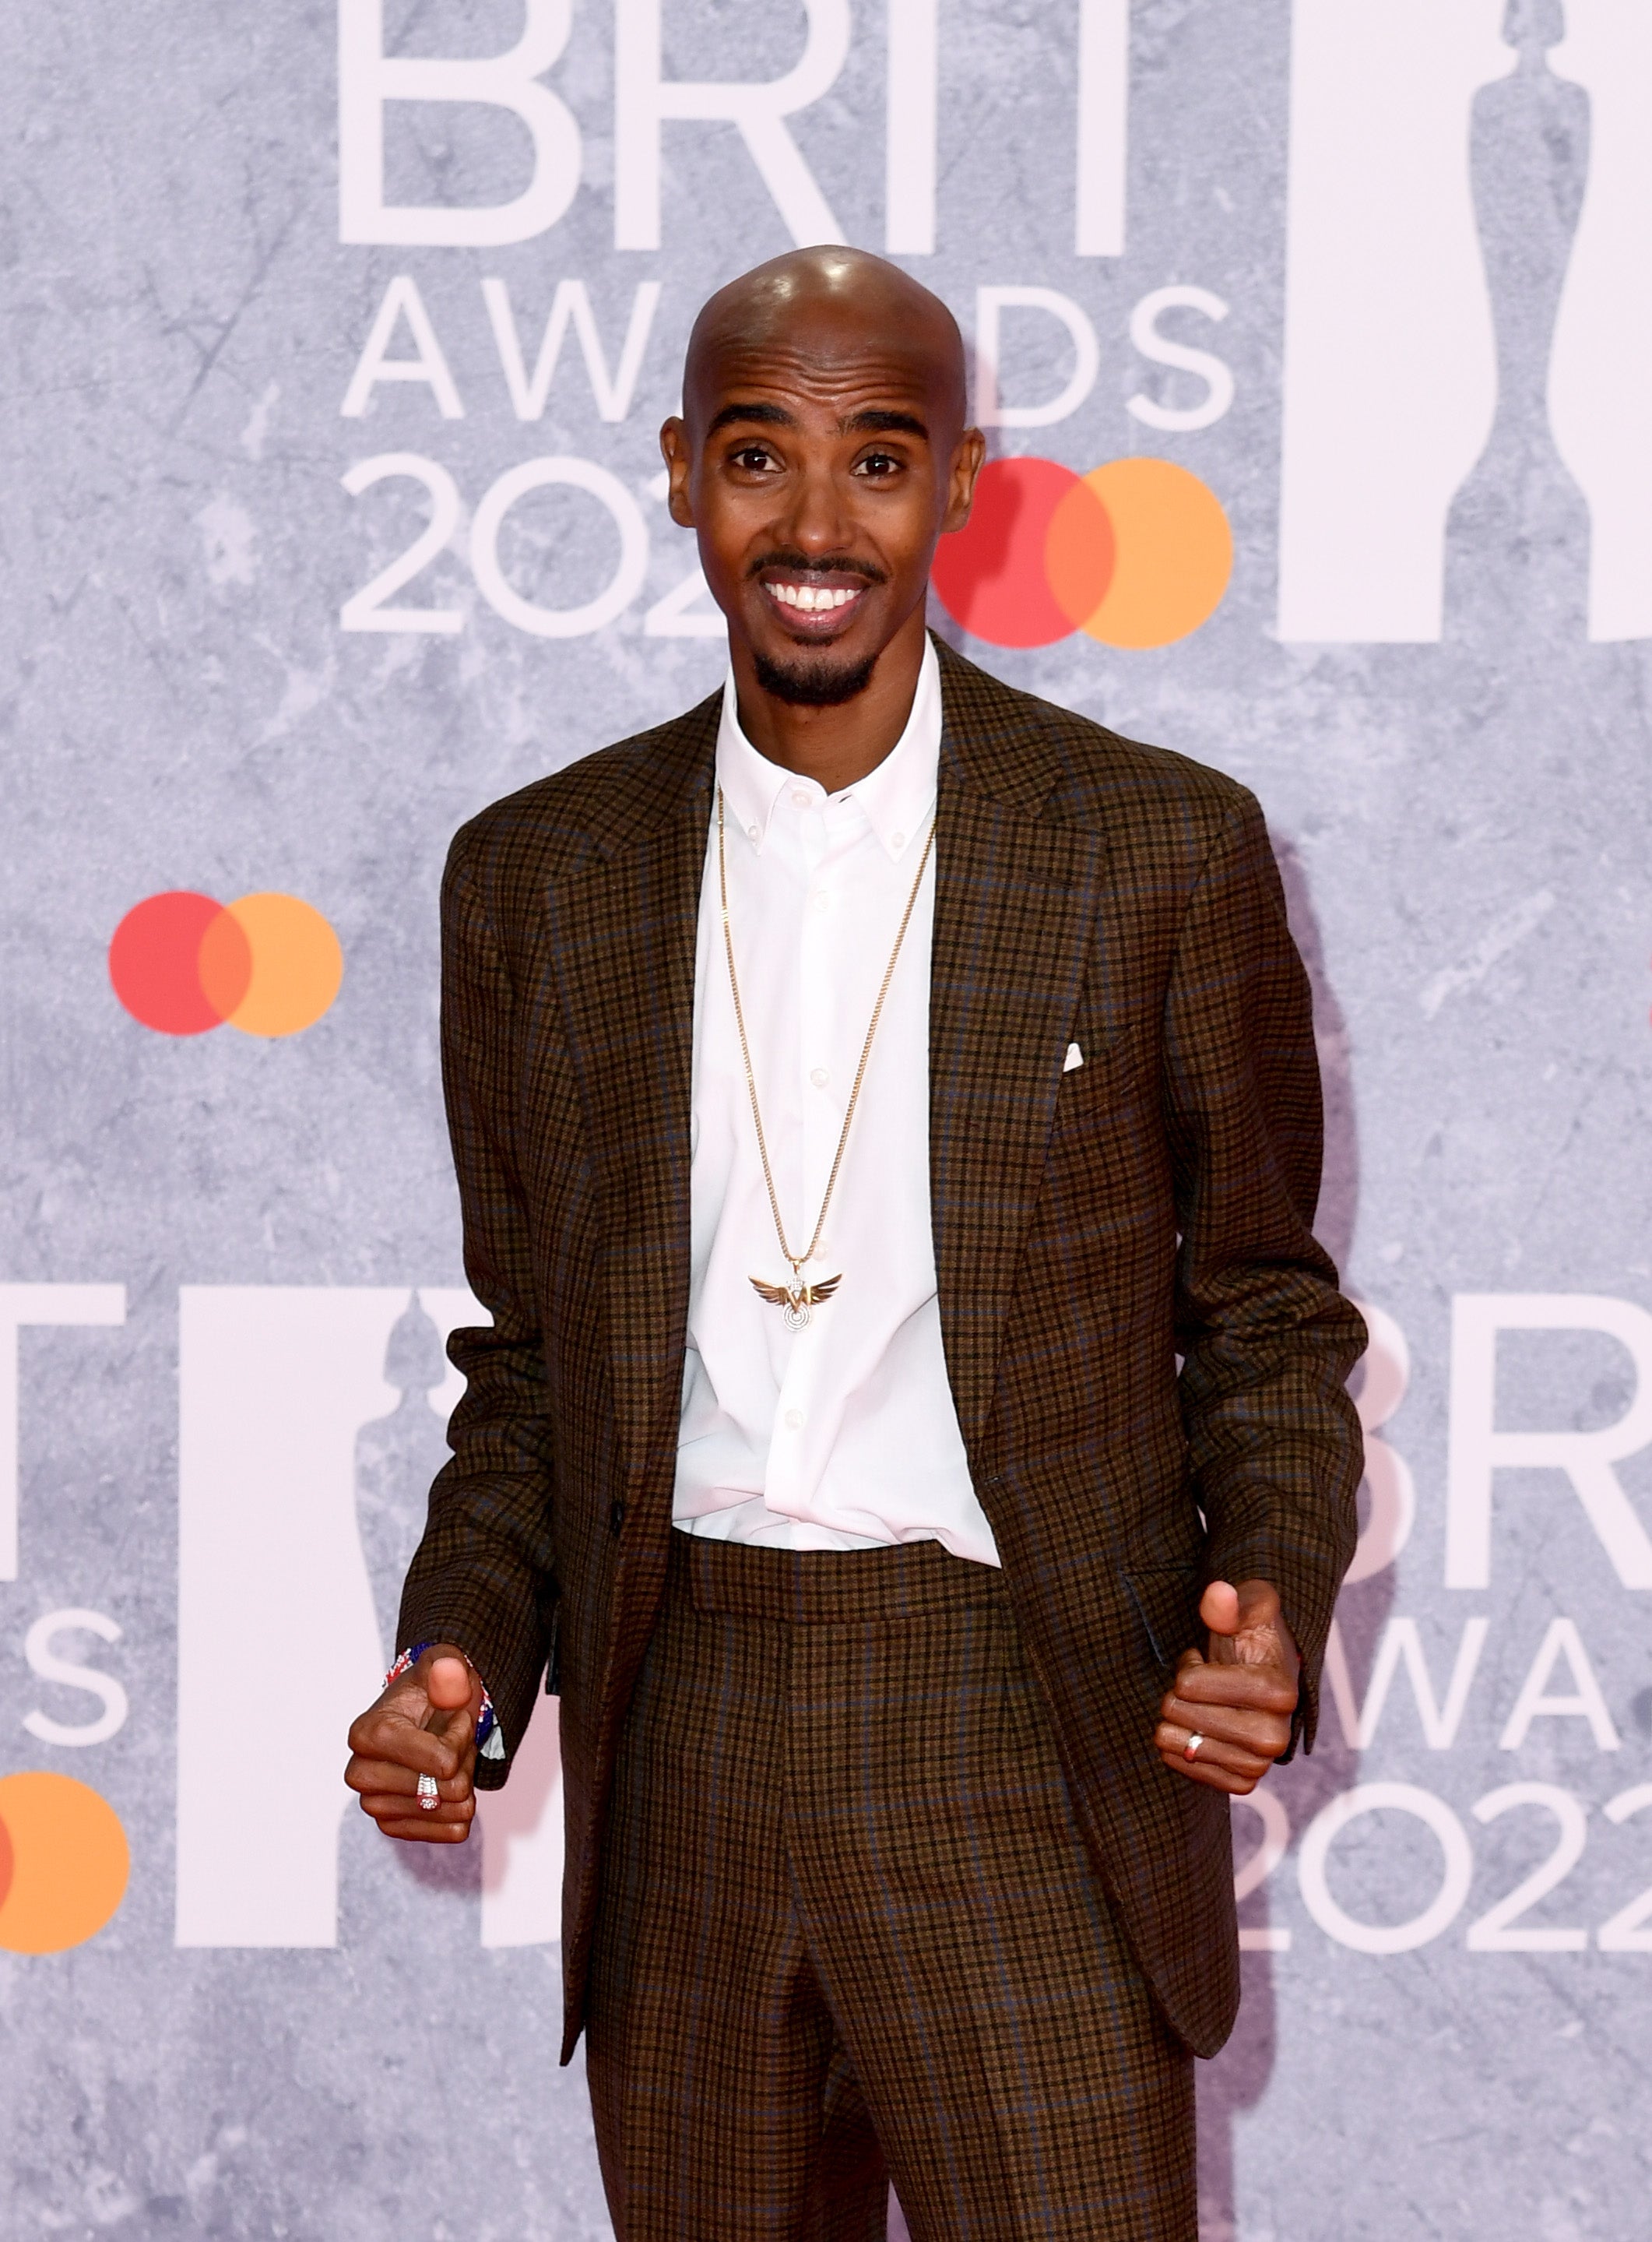 The Olympic champion arrived at the ceremony wearing a brown checked suit over the top of a white shirt. Farah paired the look with Nike trainers.